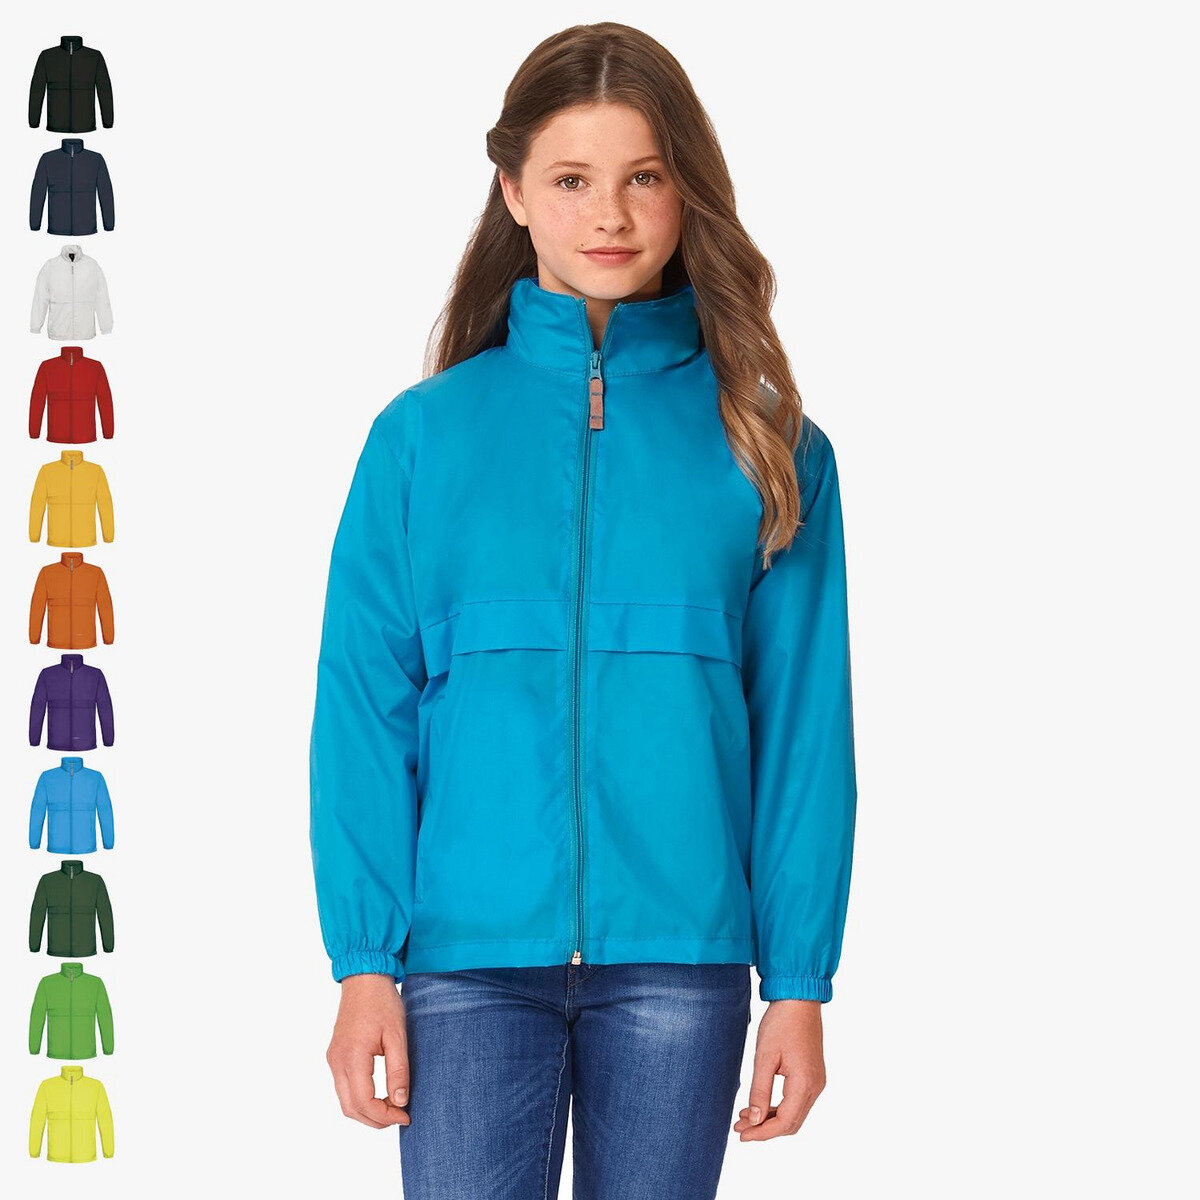 Details about   Childrens  Sirocco Windproof Jacket Waterproof Rain Coat 14 Colours All Sizes 